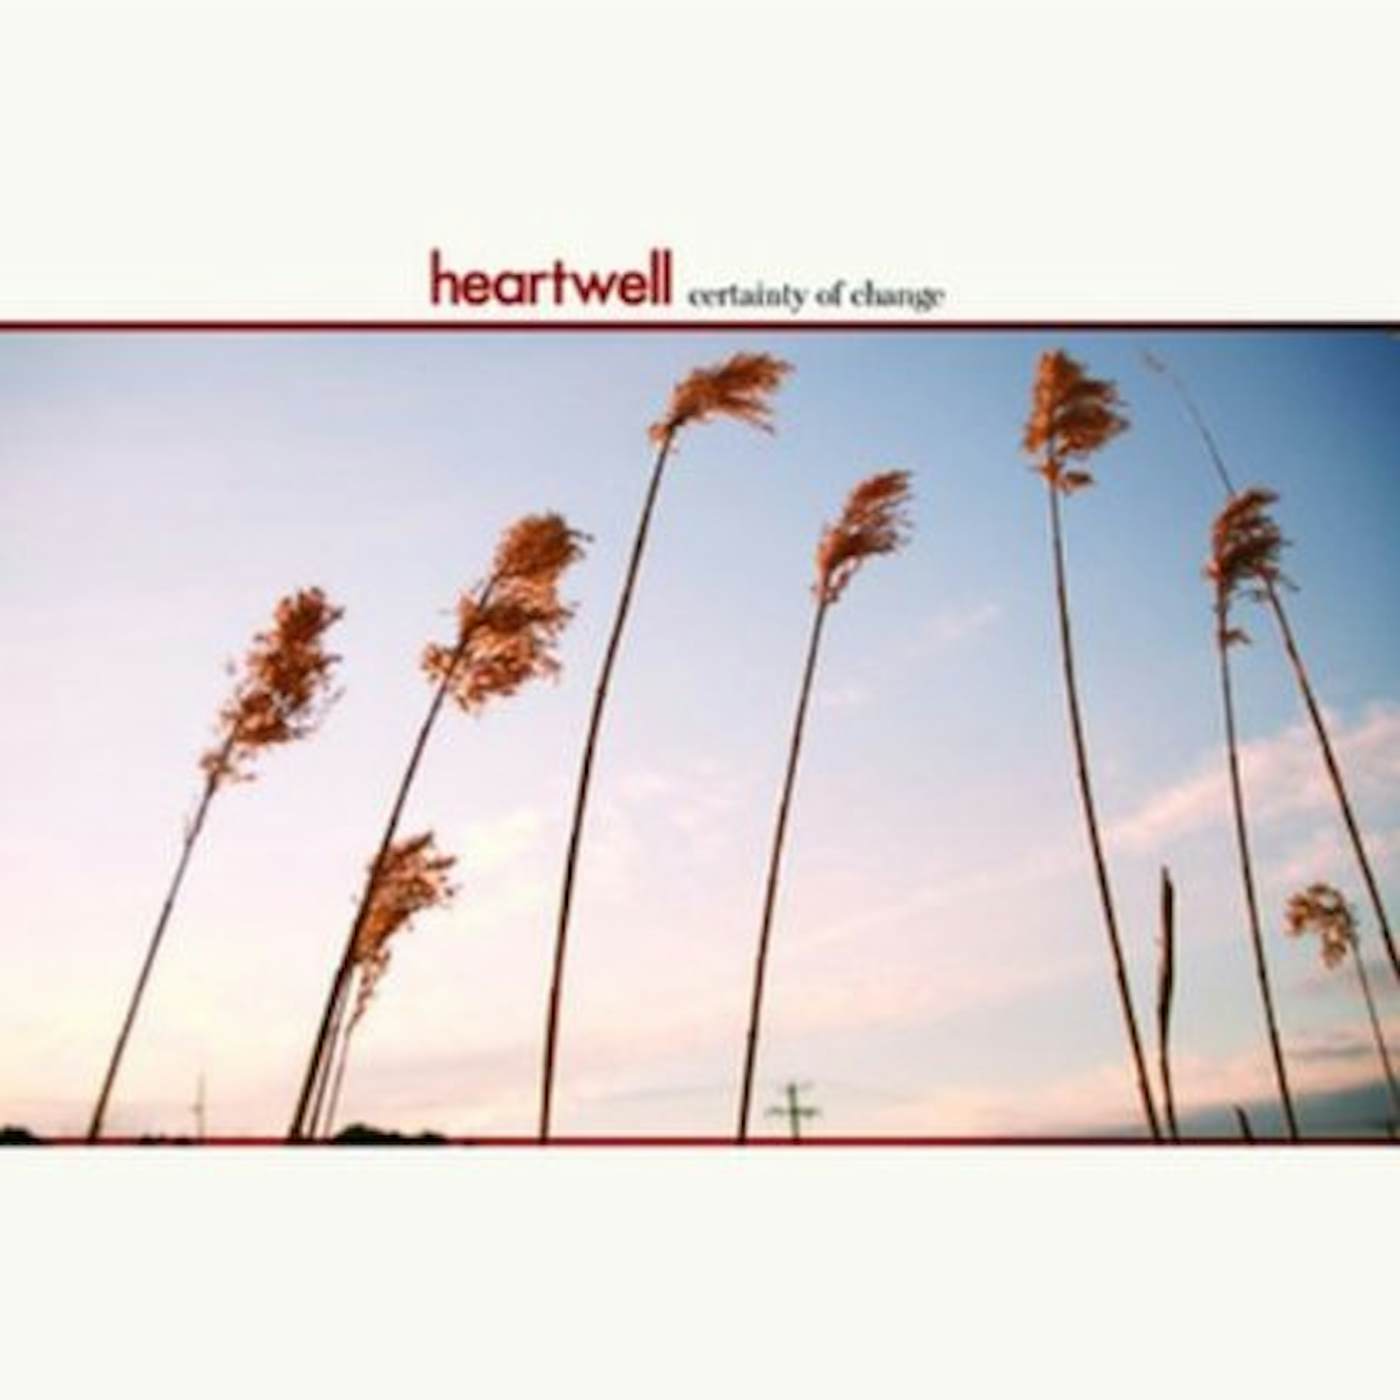 Heartwell CERTAINTY OF CHANGE CD